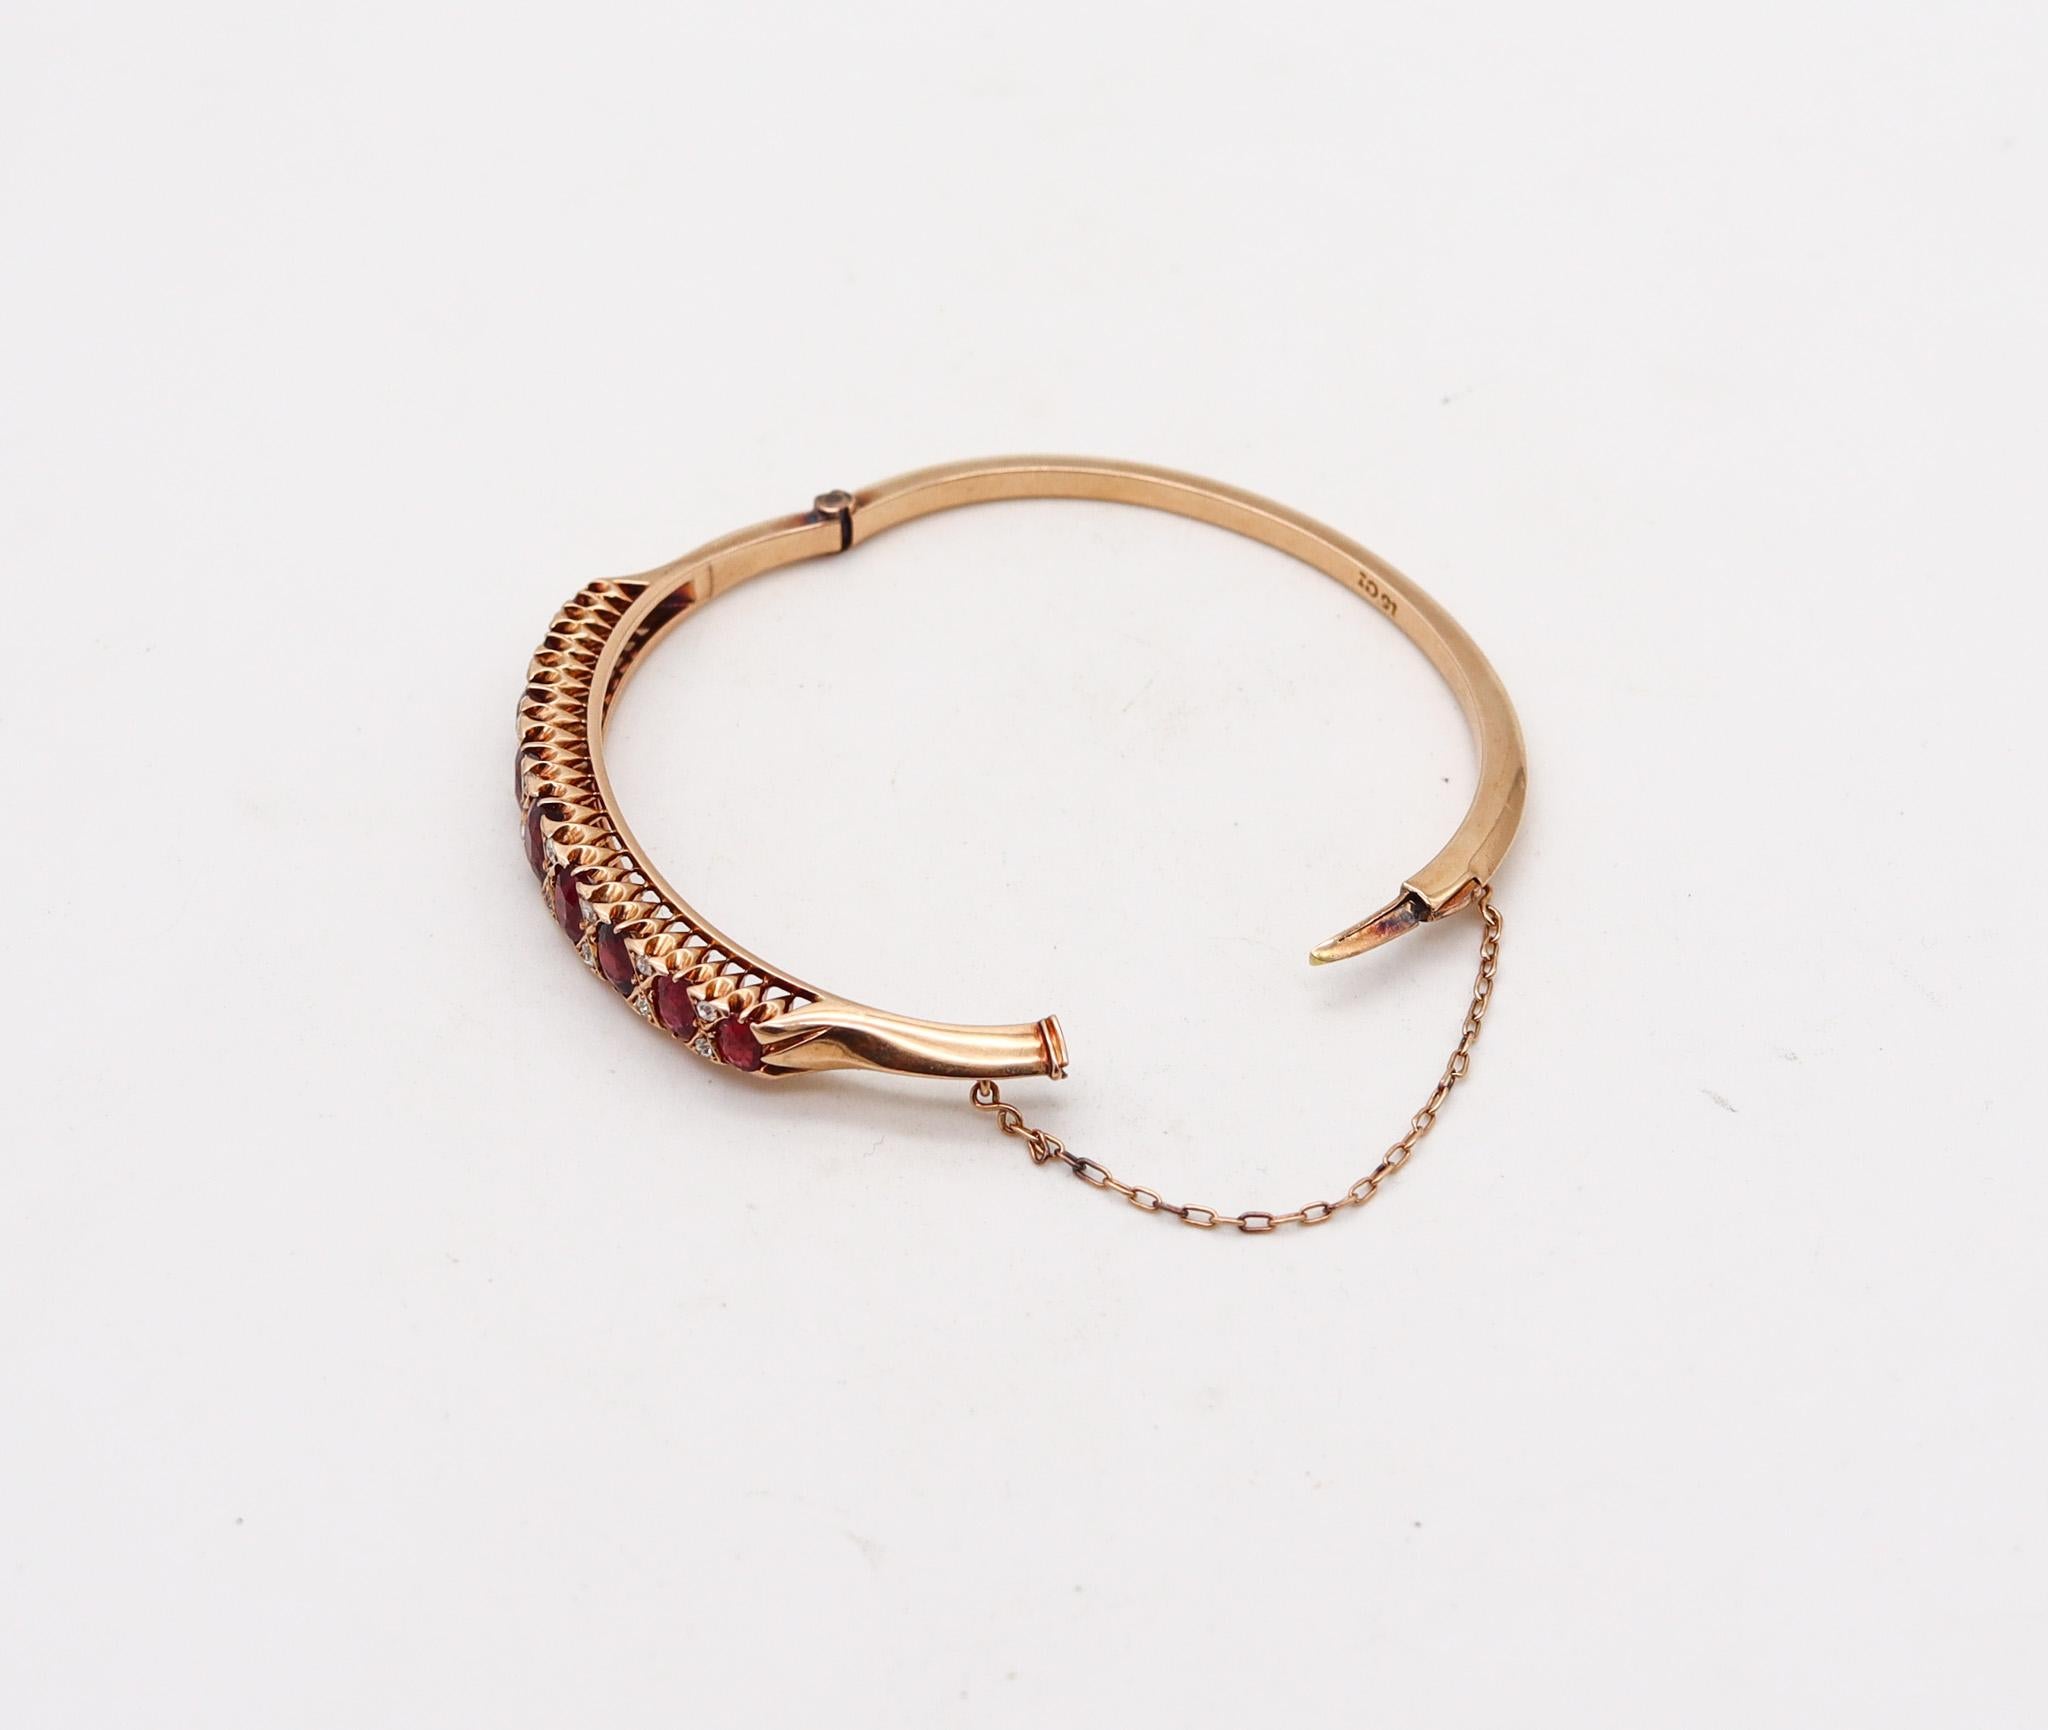 Victorian 1880 Bangle Bracelet In 15kt Gold With 14.35 Ctw Rubies And Diamonds 1